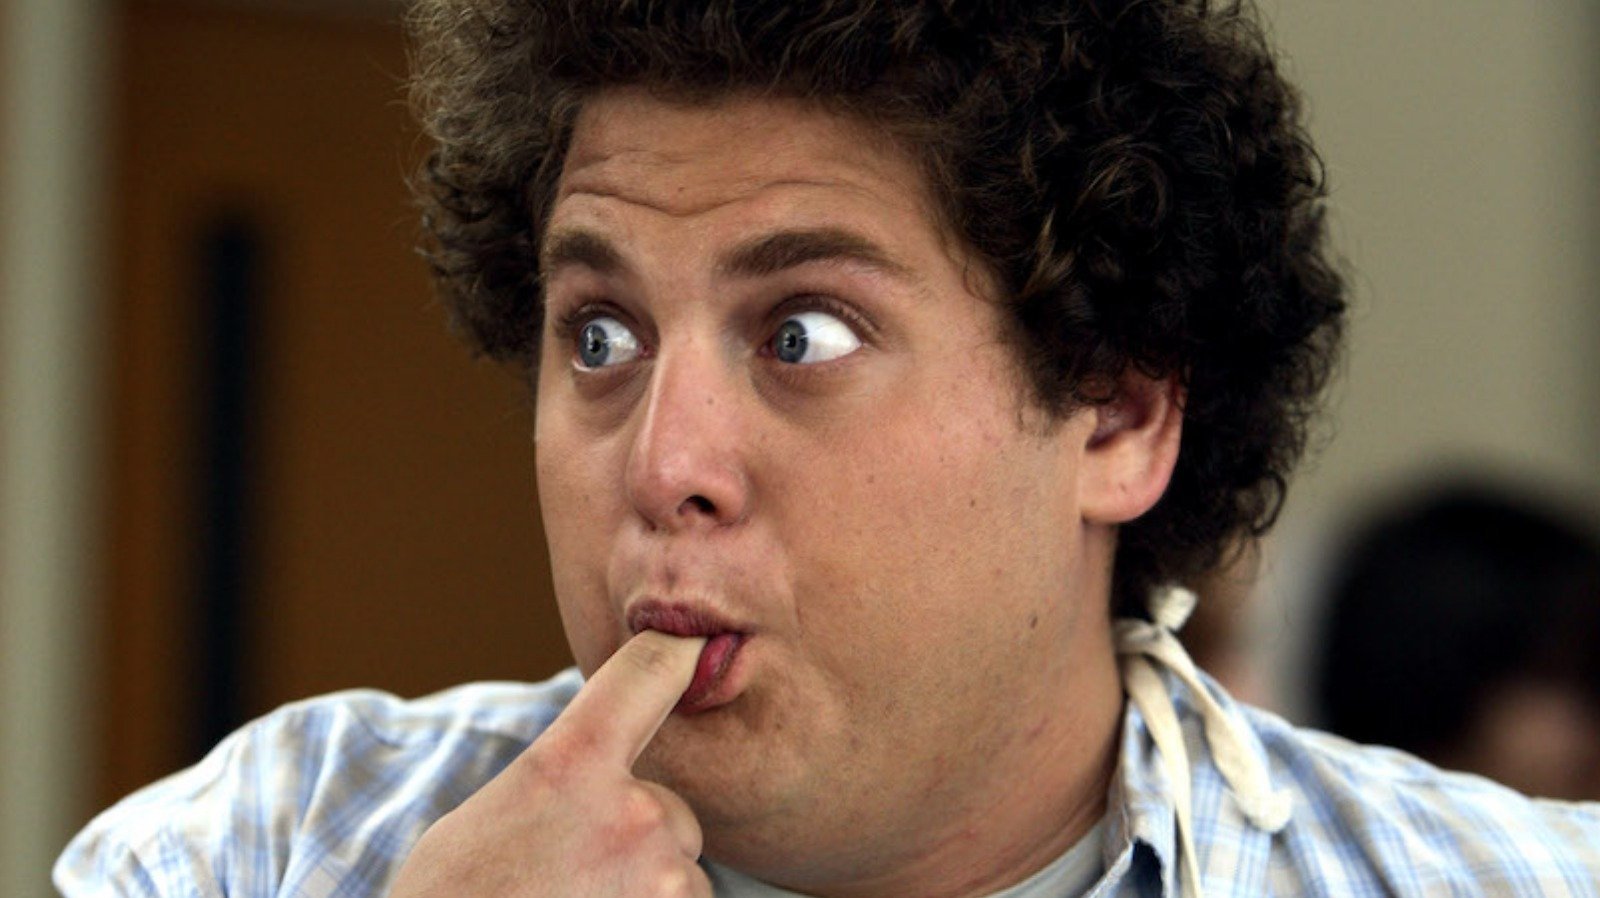 12 Movies Like Superbad That Comedy Fans Need To Watch - /Film